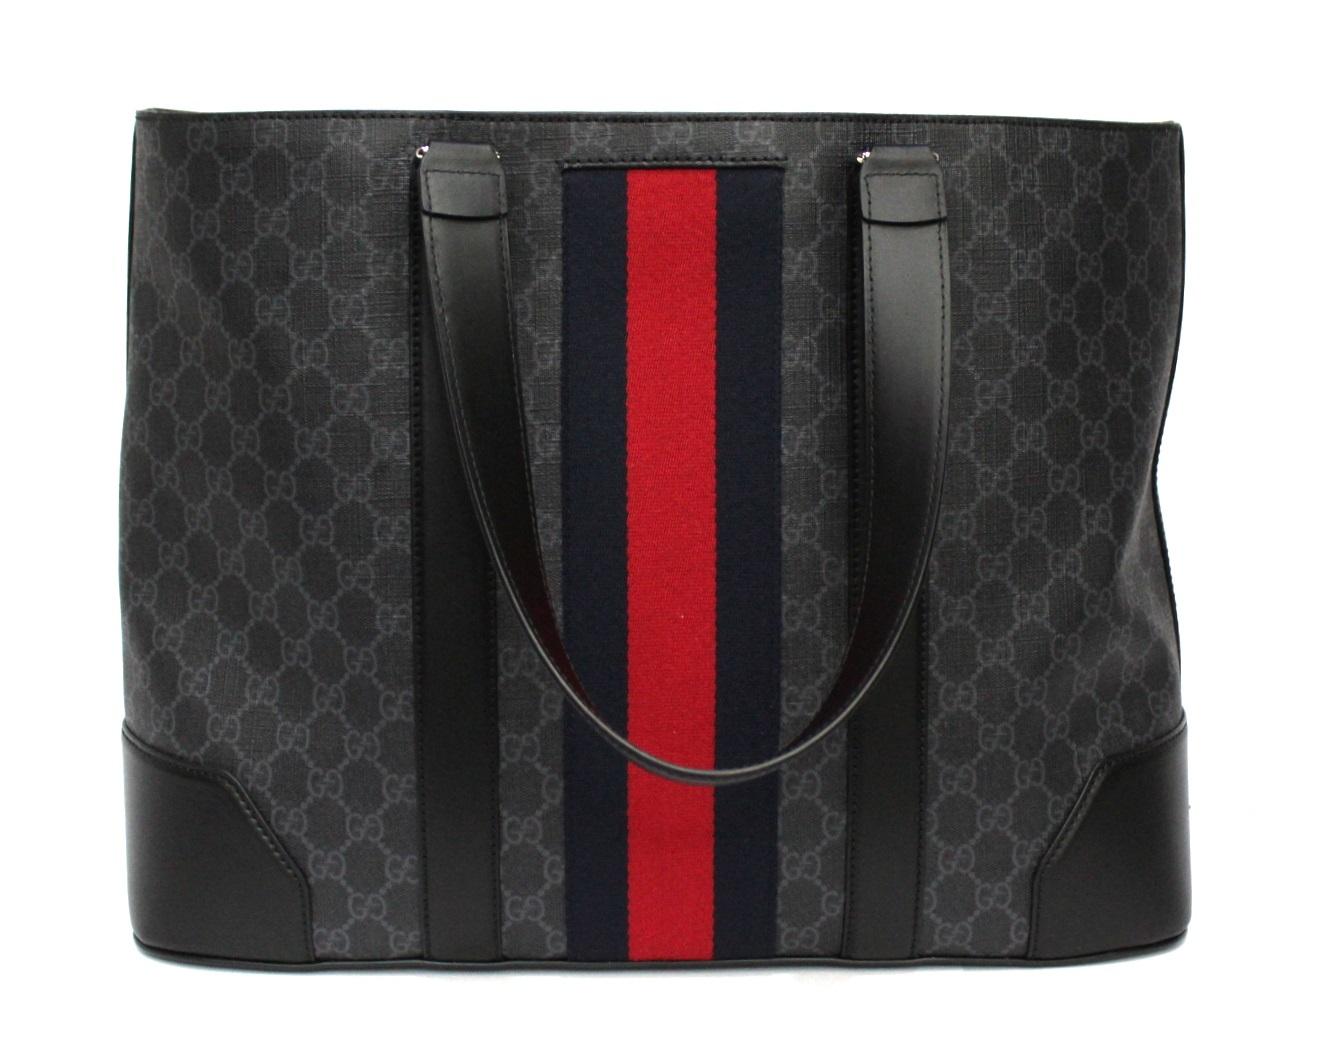 Gucci sports shopper made of classic supreme GG canvas with black leather details and web band decoration.

Magnetic button closure, internally very large. Equipped with double leather handle with silver hardware.

Comfortable and capacious, perfect